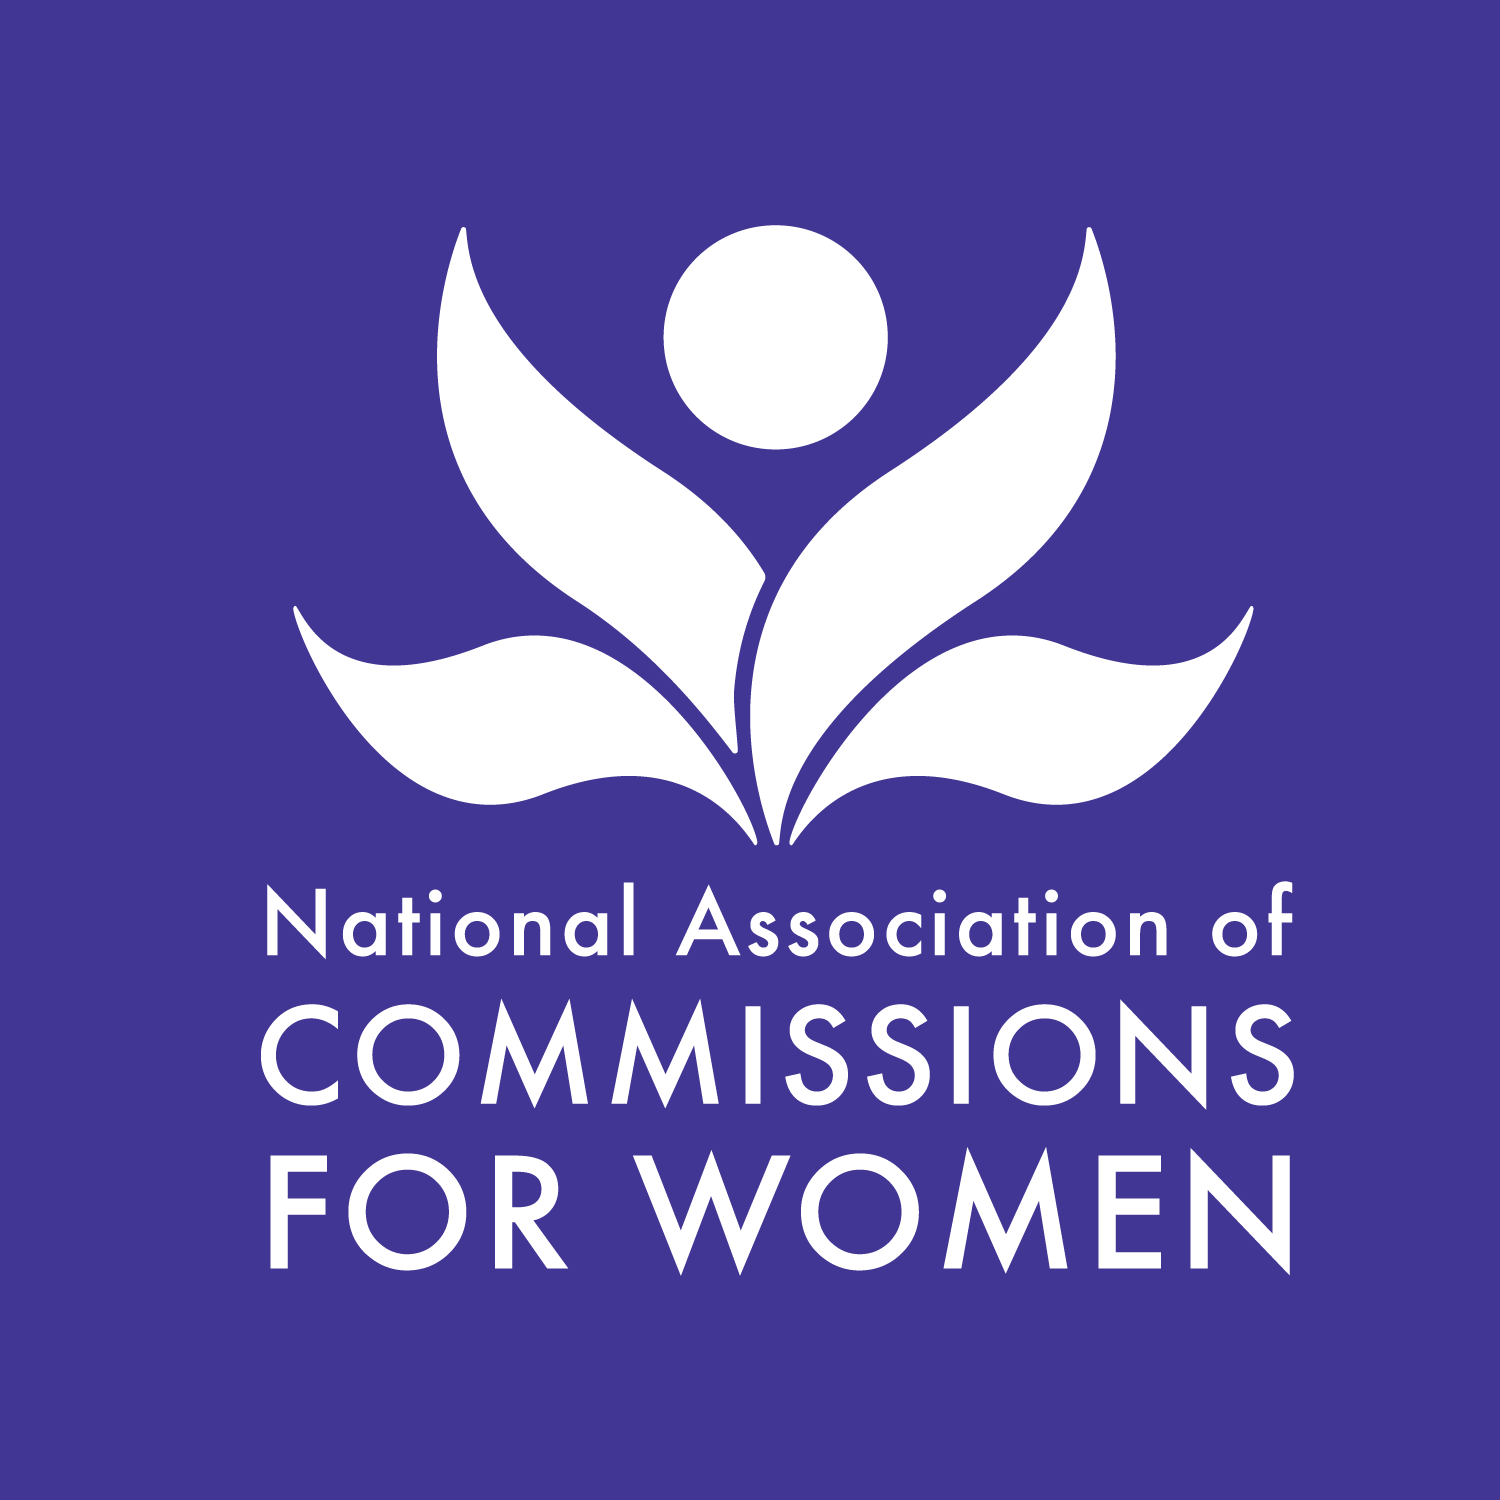 Woman Organization in New York New York - National Association of Commissions for Women